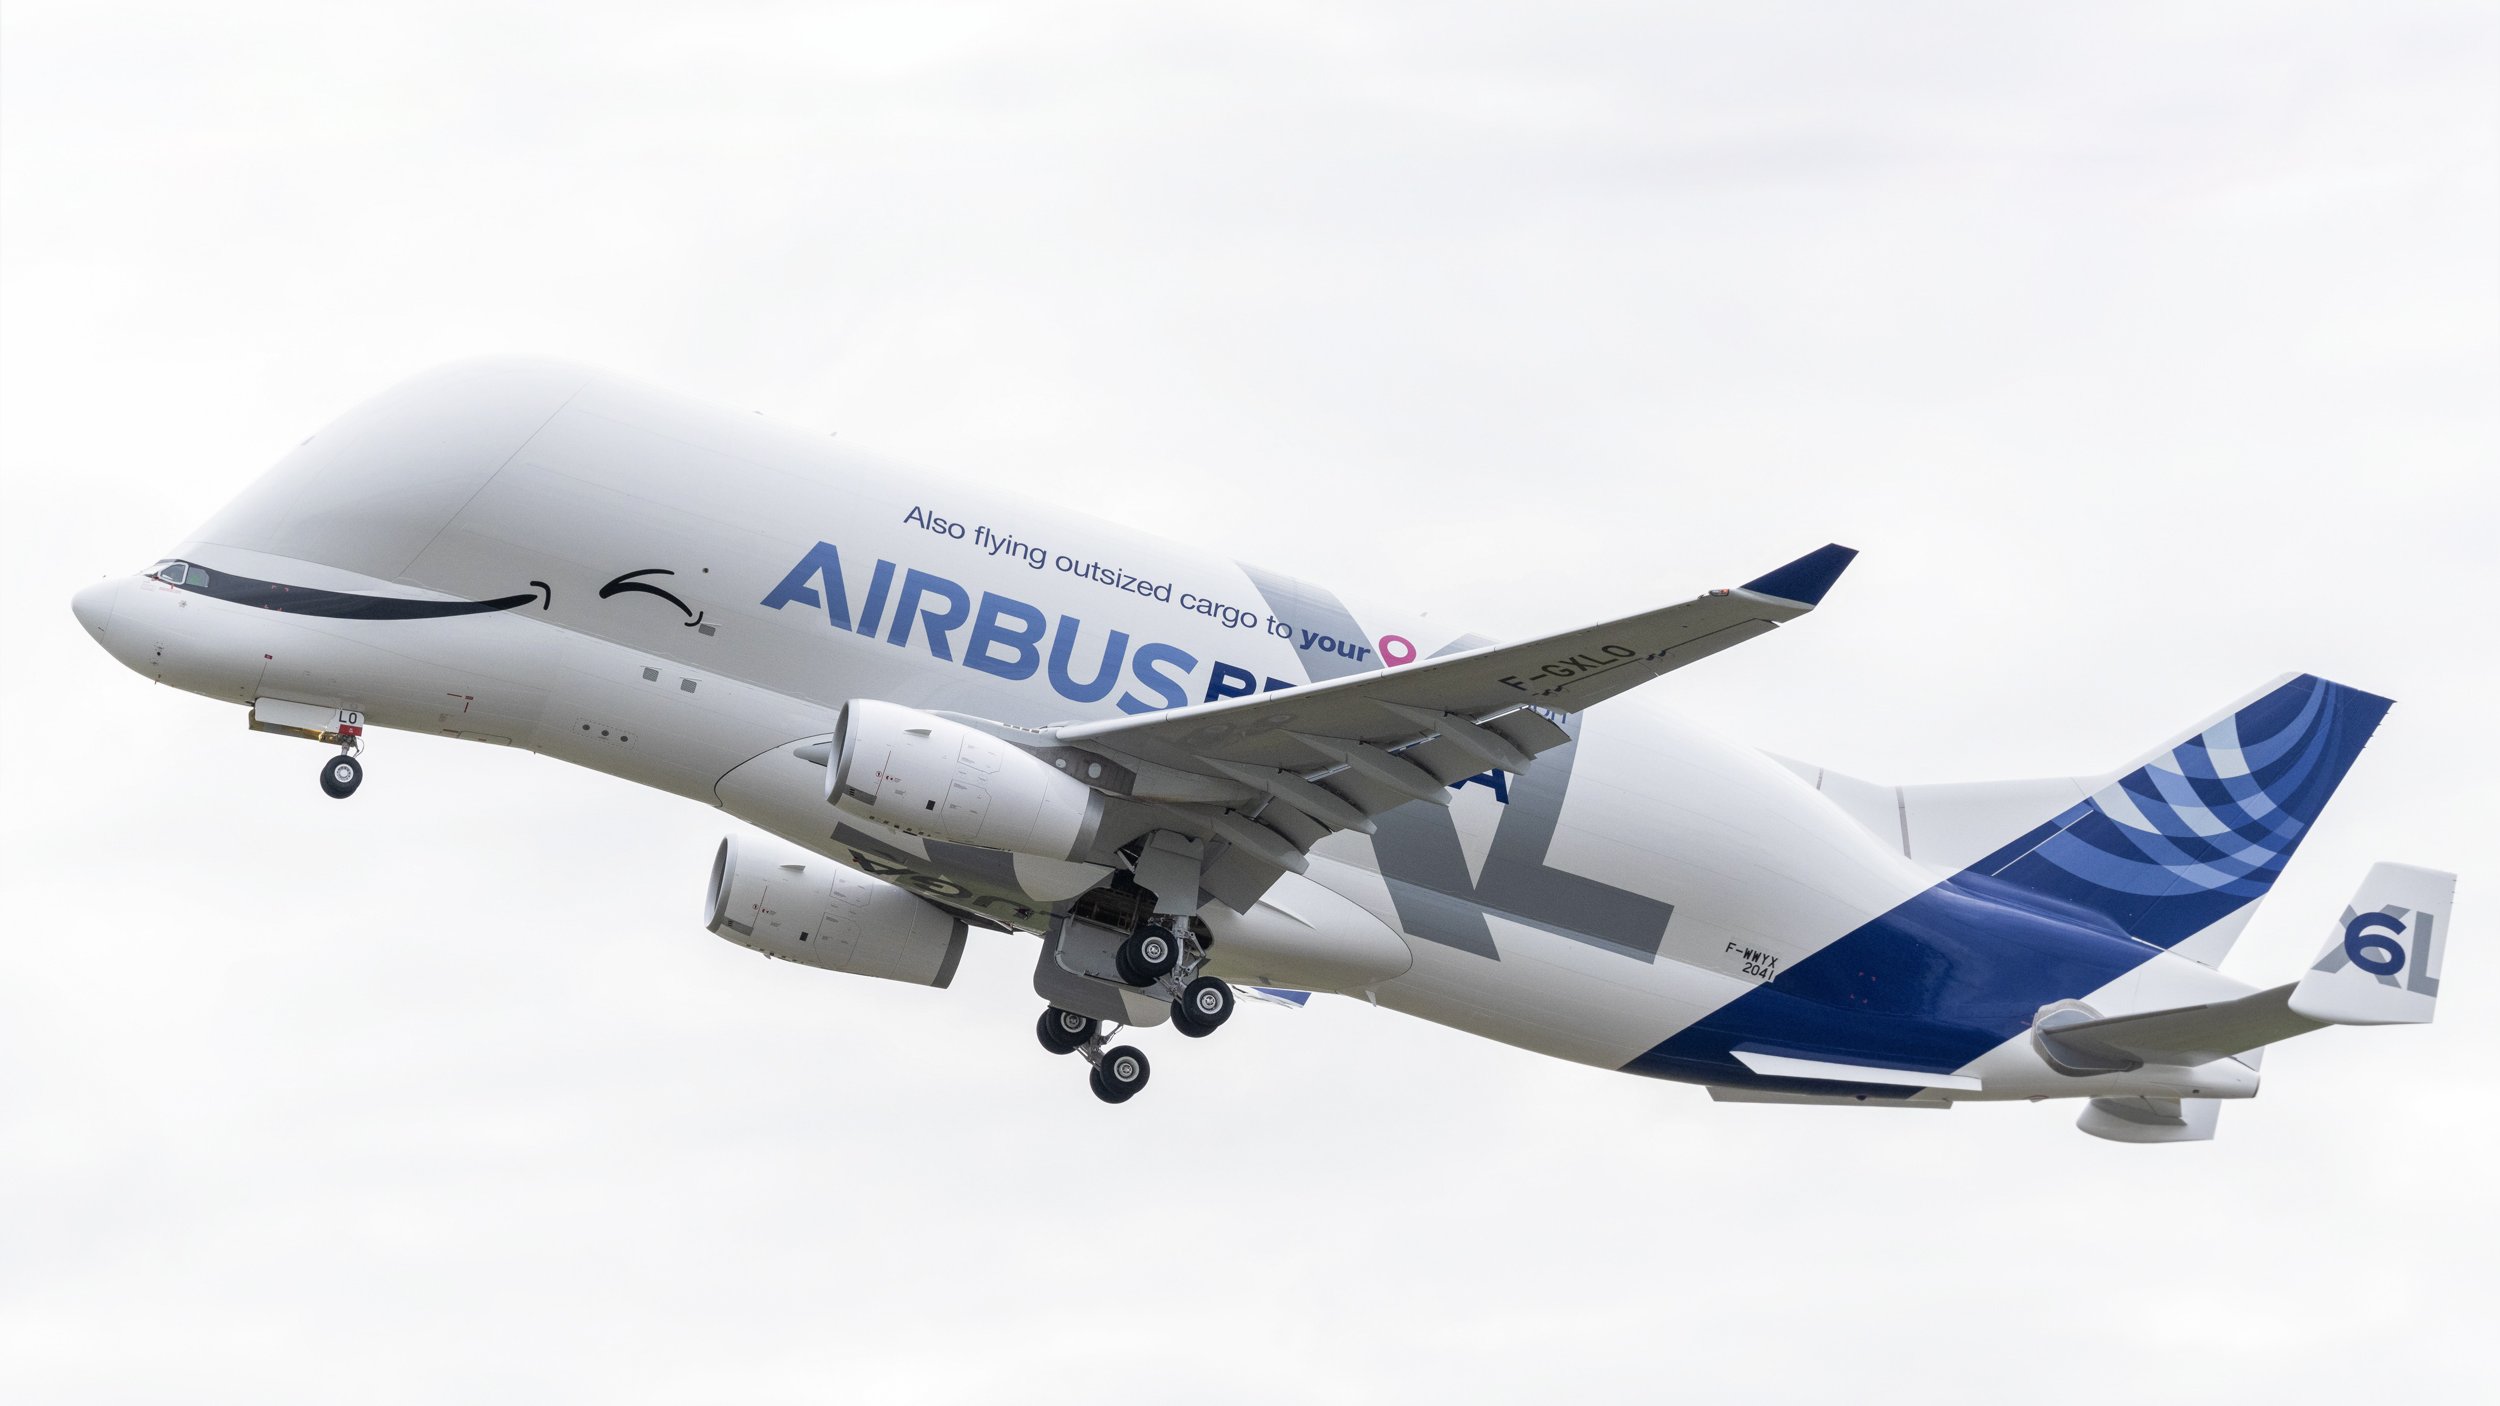 European plane maker Airbus last BelugaXL 6 took off for the first time today at its home place, Toulouse, France. Further, Airbus shared this huge milestone on Twitter and the news with all aviators.